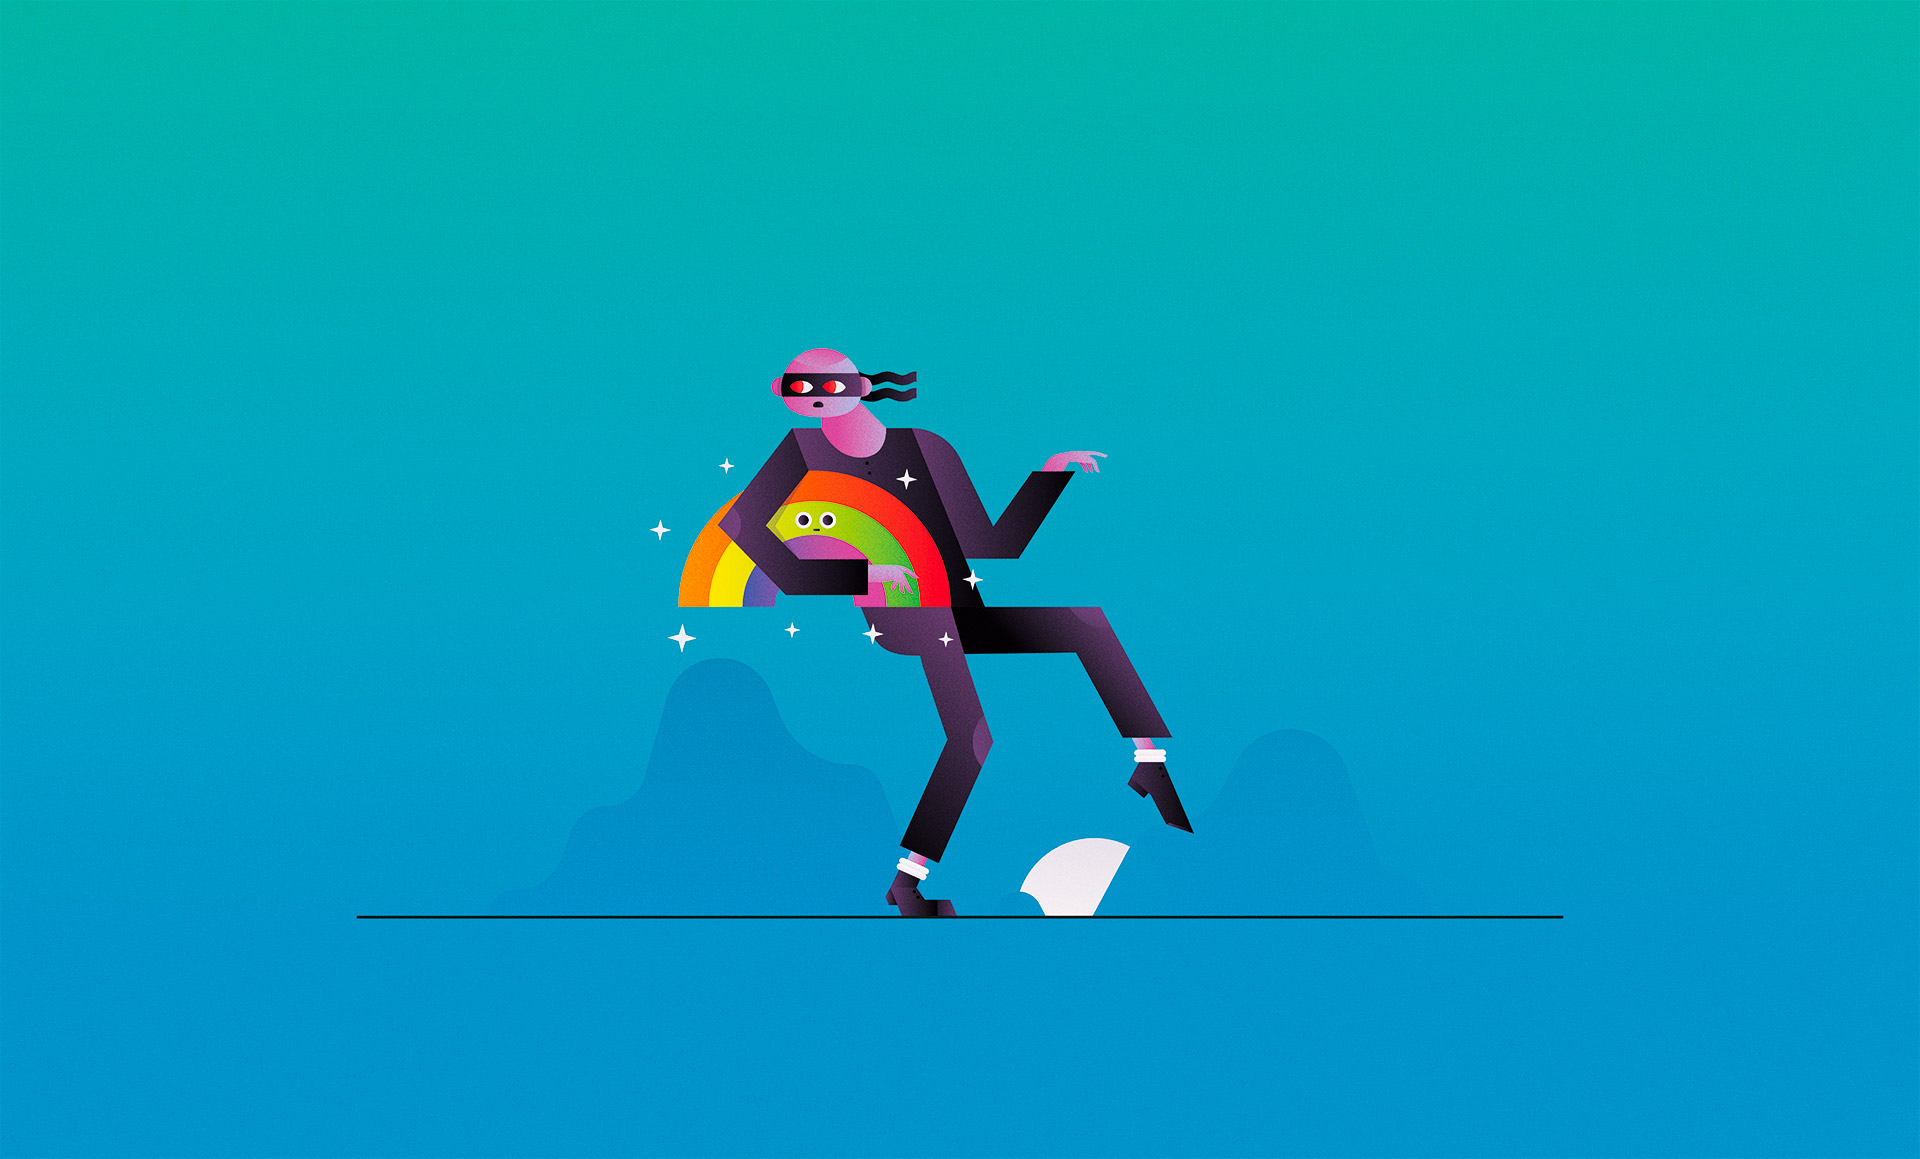 Quirky Illustrations by Kenzo Bruijnaers | Daily design inspiration for ...